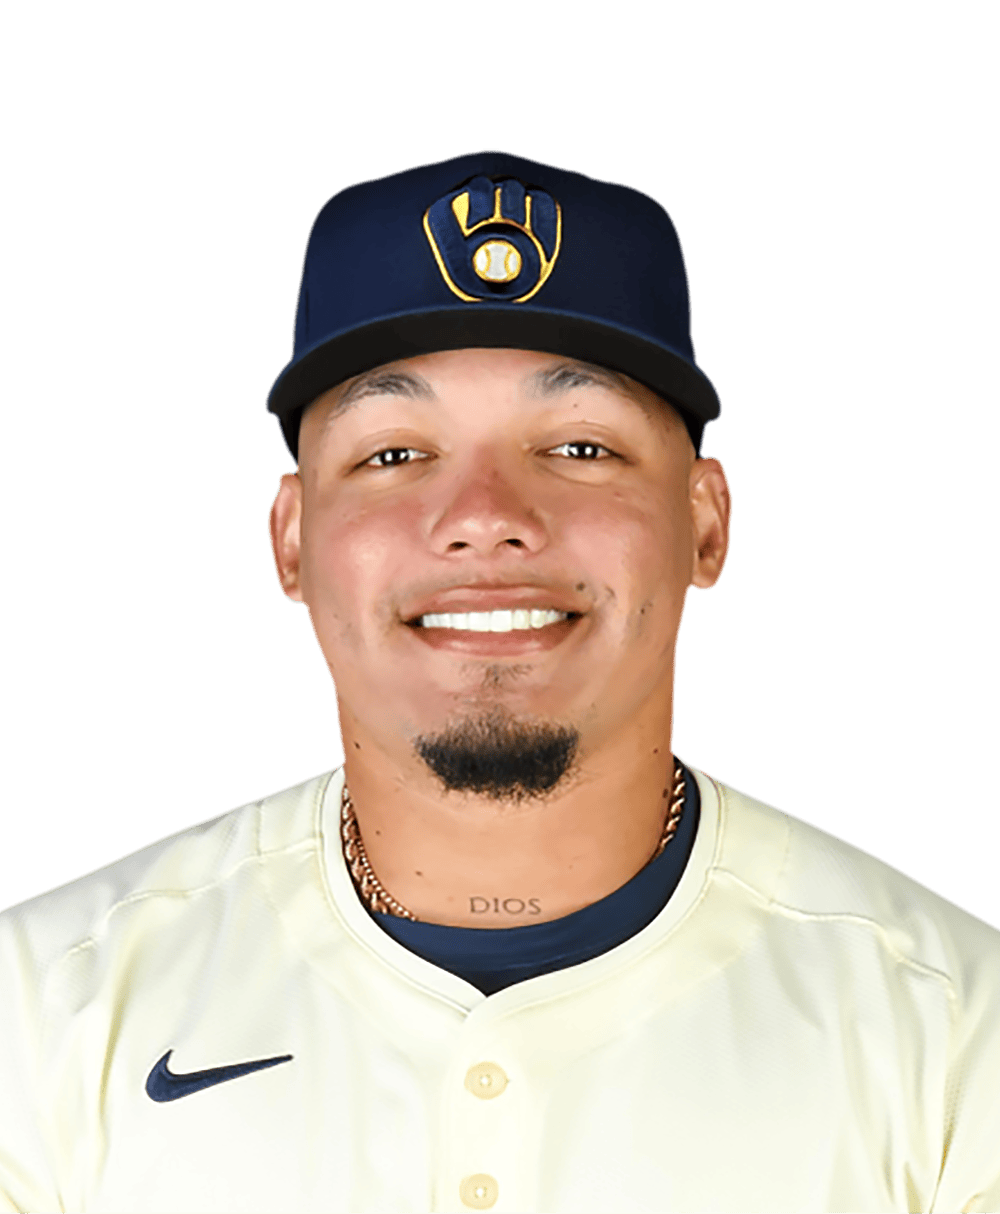 Contreras' 7th-inning double leads Brewers over Phillies 5-3